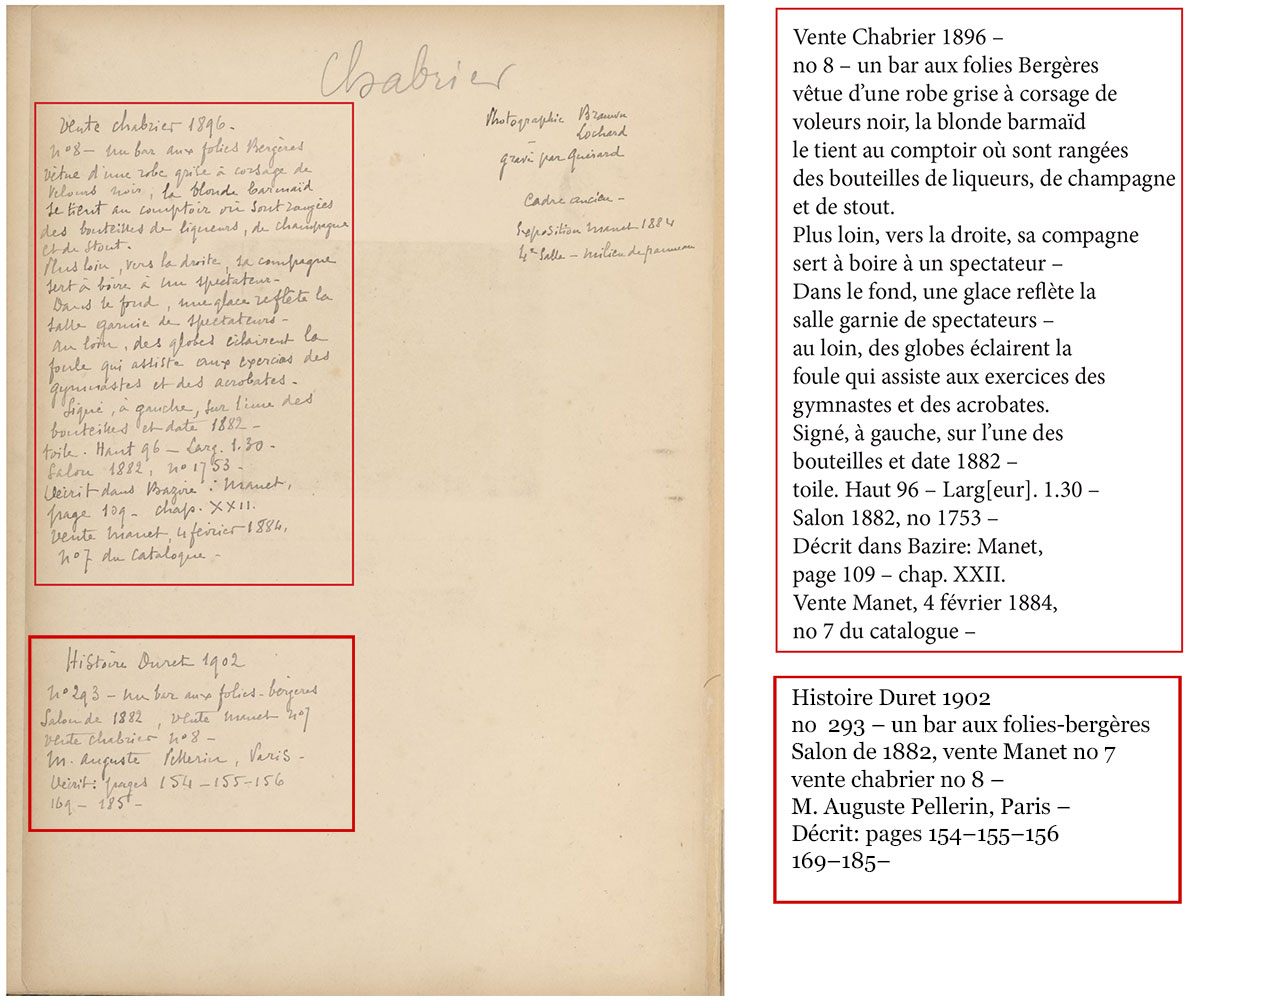 Album page with sepia photograph of Manet's painting with hand-written text above and below.